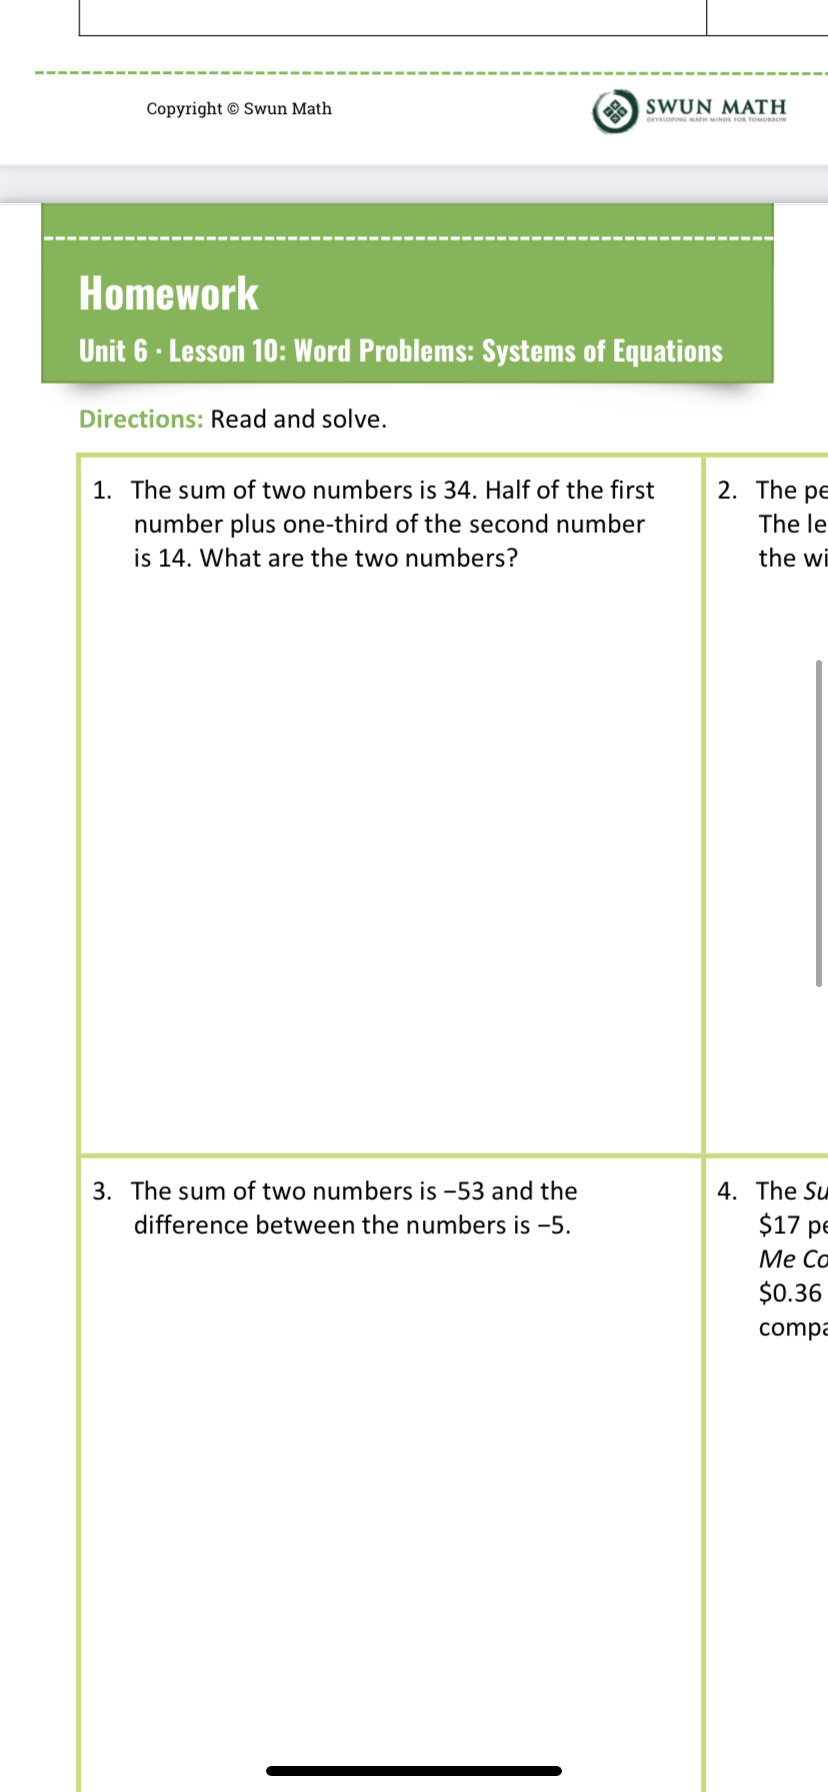 Copyright © Swun Math
O SWUN MATH
DEVLOPING MATH MINDS FOs TOMORROW
Homework
Unit 6 · Lesson 10: Word Problems: Systems of Equations
Directions: Read and solve.
1. The sum of two numbers is 34. Half of the first
2. The pe
number plus one-third of the second number
is 14. What are the two numbers?
The le
the wi
4. The Su
$17 pe
Ме Со
$0.36
3. The sum of two numbers is -53 and the
difference between the numbers is -5.
compa
